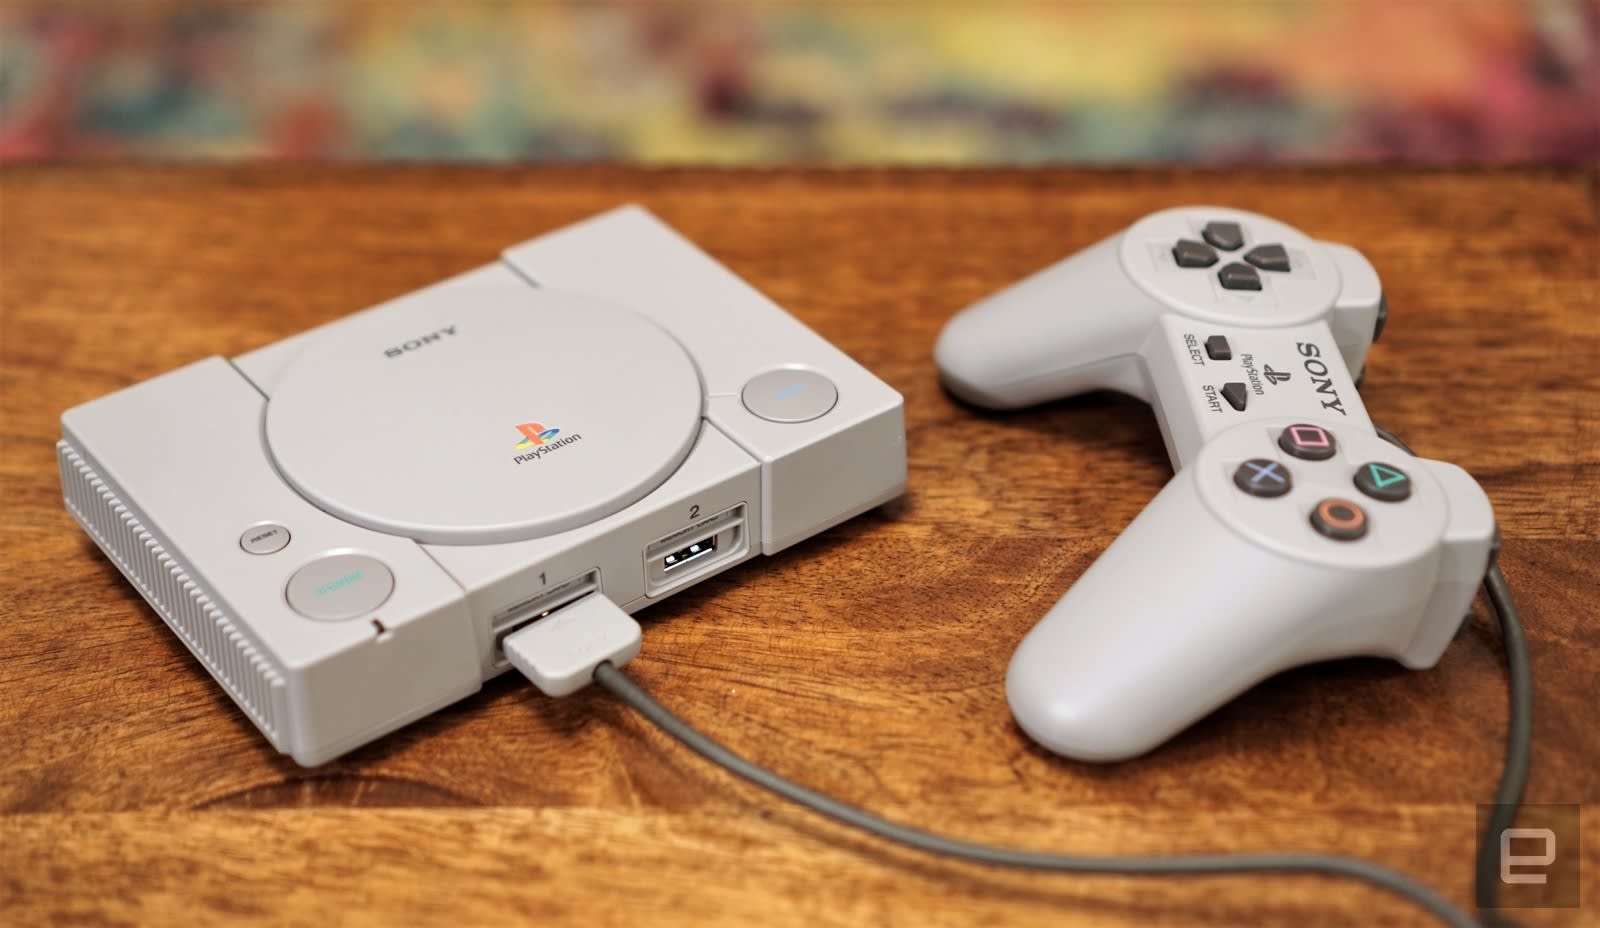 camera Intervene brand name PlayStation Classic review: A disappointing dose of nostalgia | Engadget